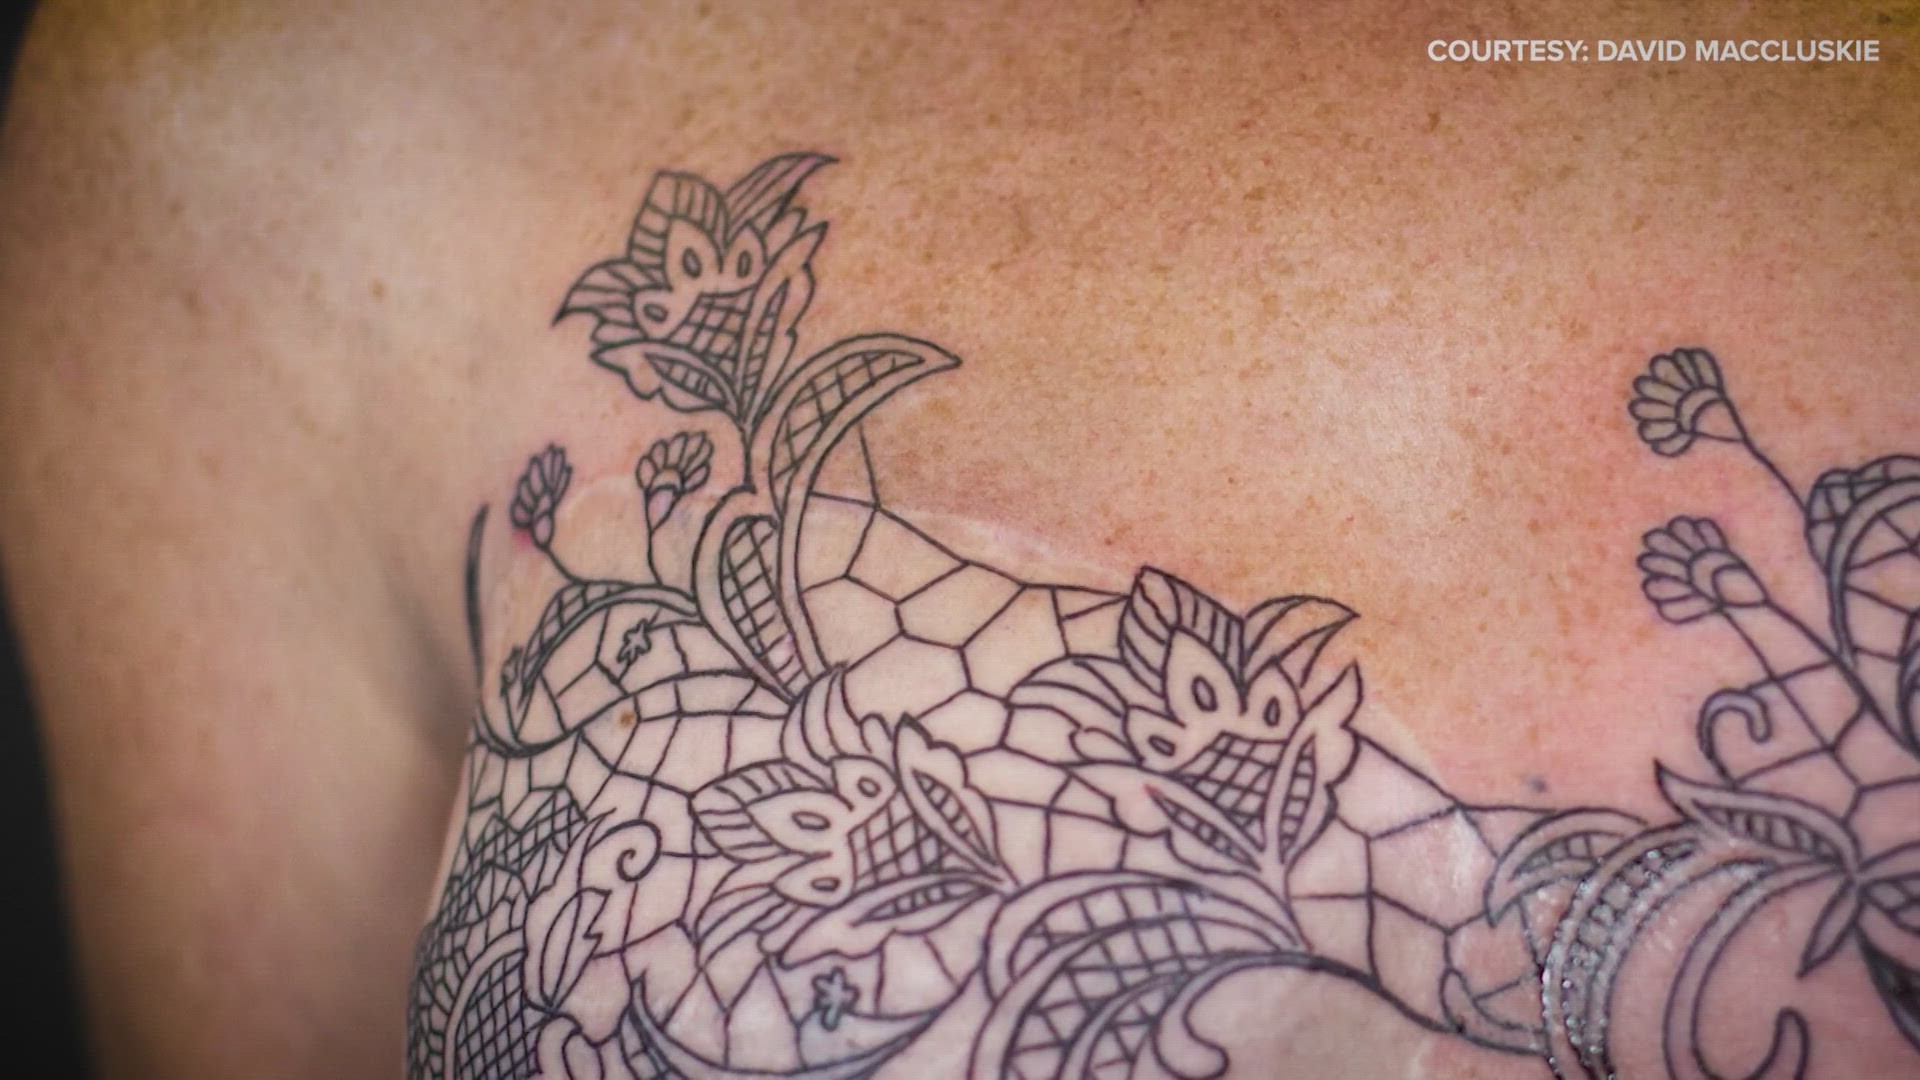 Mastectomy tattoos for women who've battled breast cancer